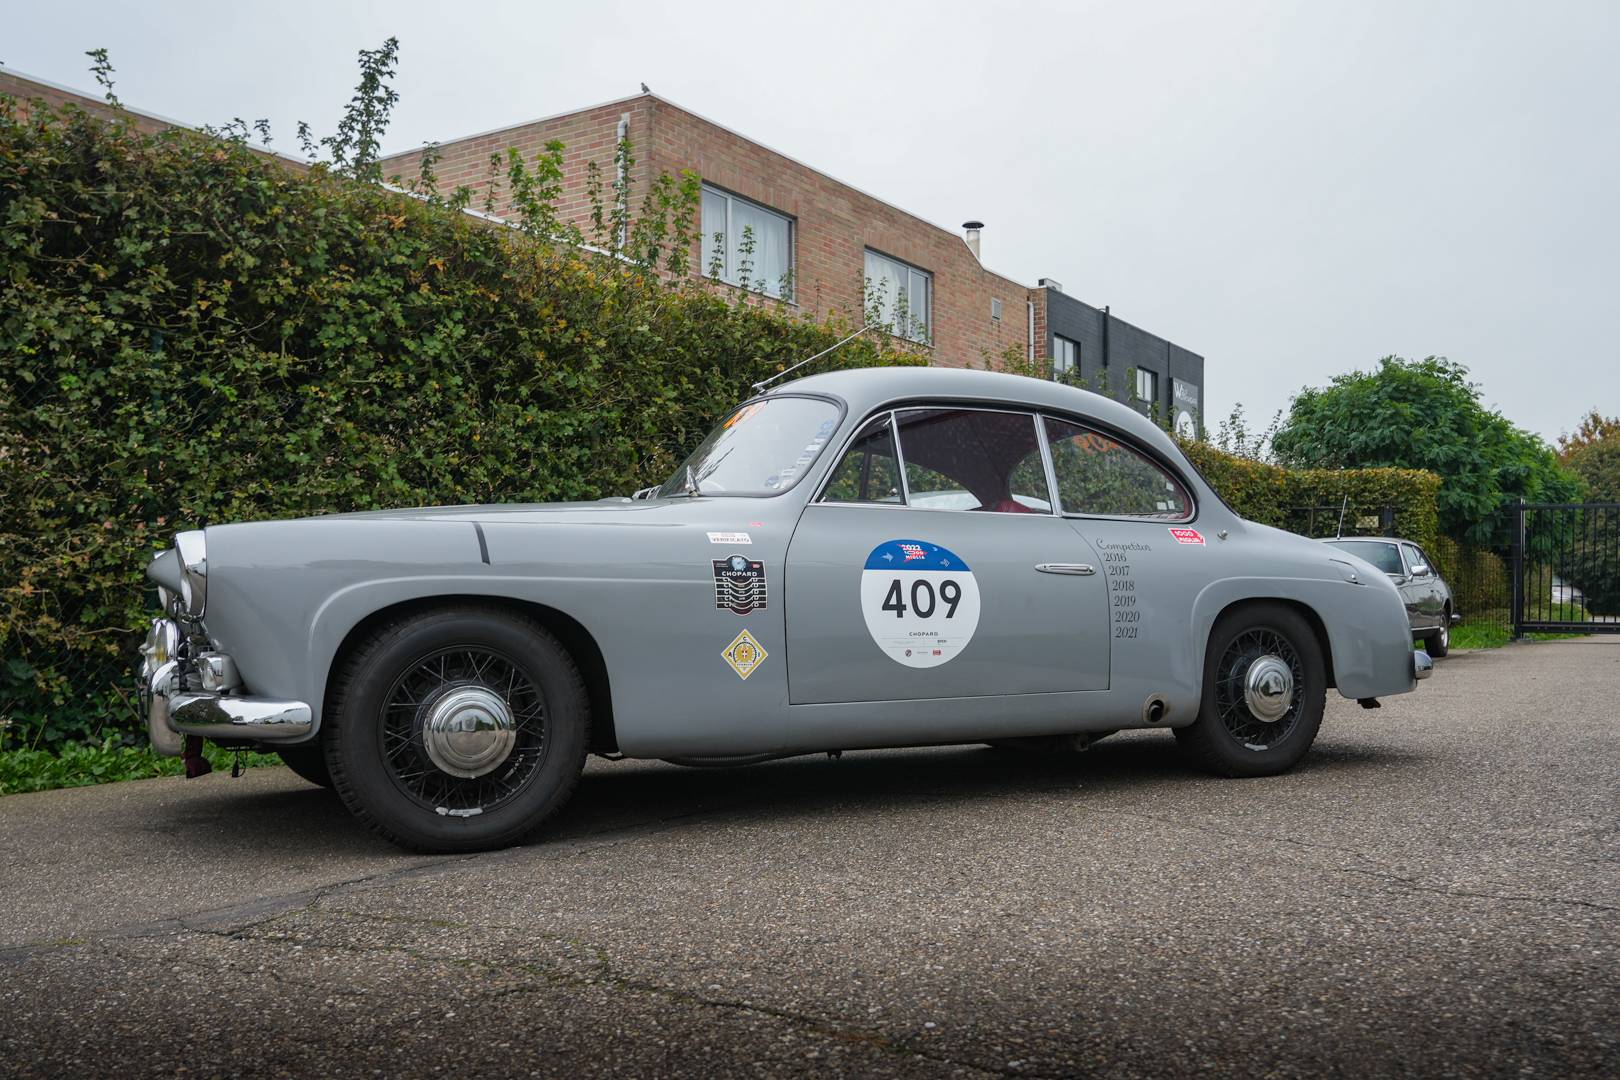 For Sale: Salmson 2300S (1956) offered for £98,952